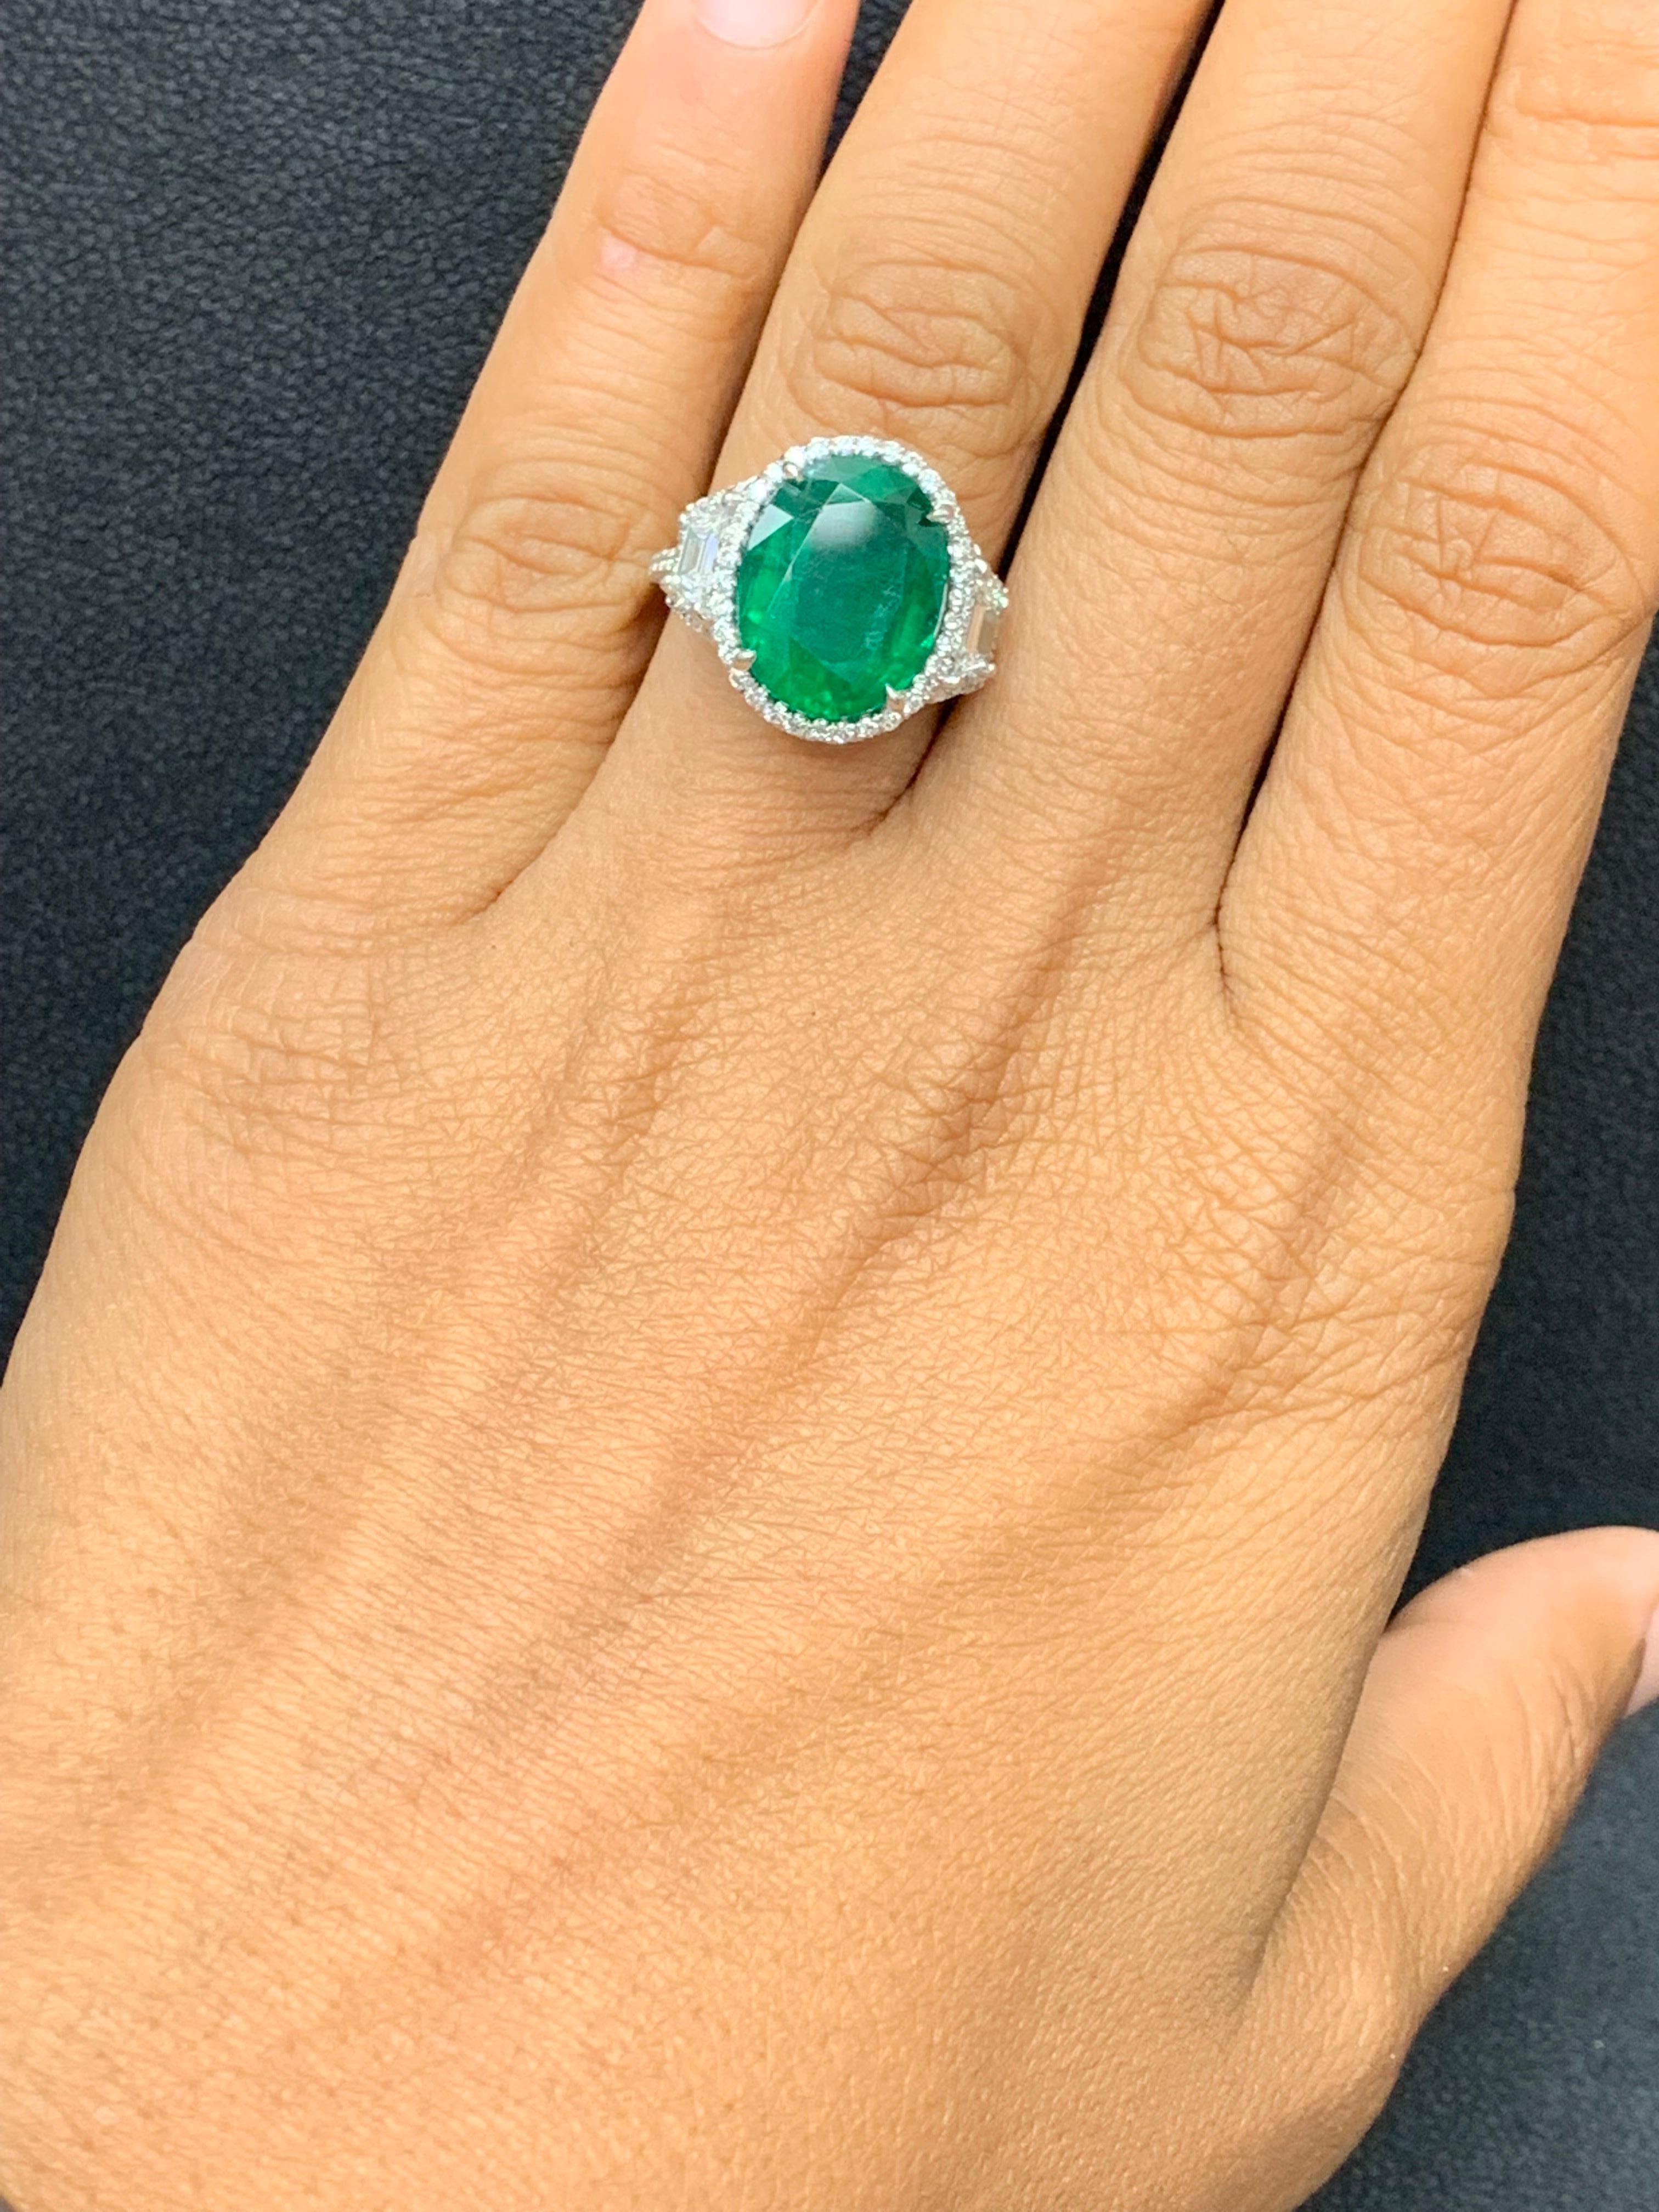 This three-stone ring is set with a 6.55 carat cushion cut emerald center stone flanked with trapezoid diamond side stones weighing 1.14 carats. A single row of round brilliant diamonds accent the center and side stones. Made in platinum . Size 6.5